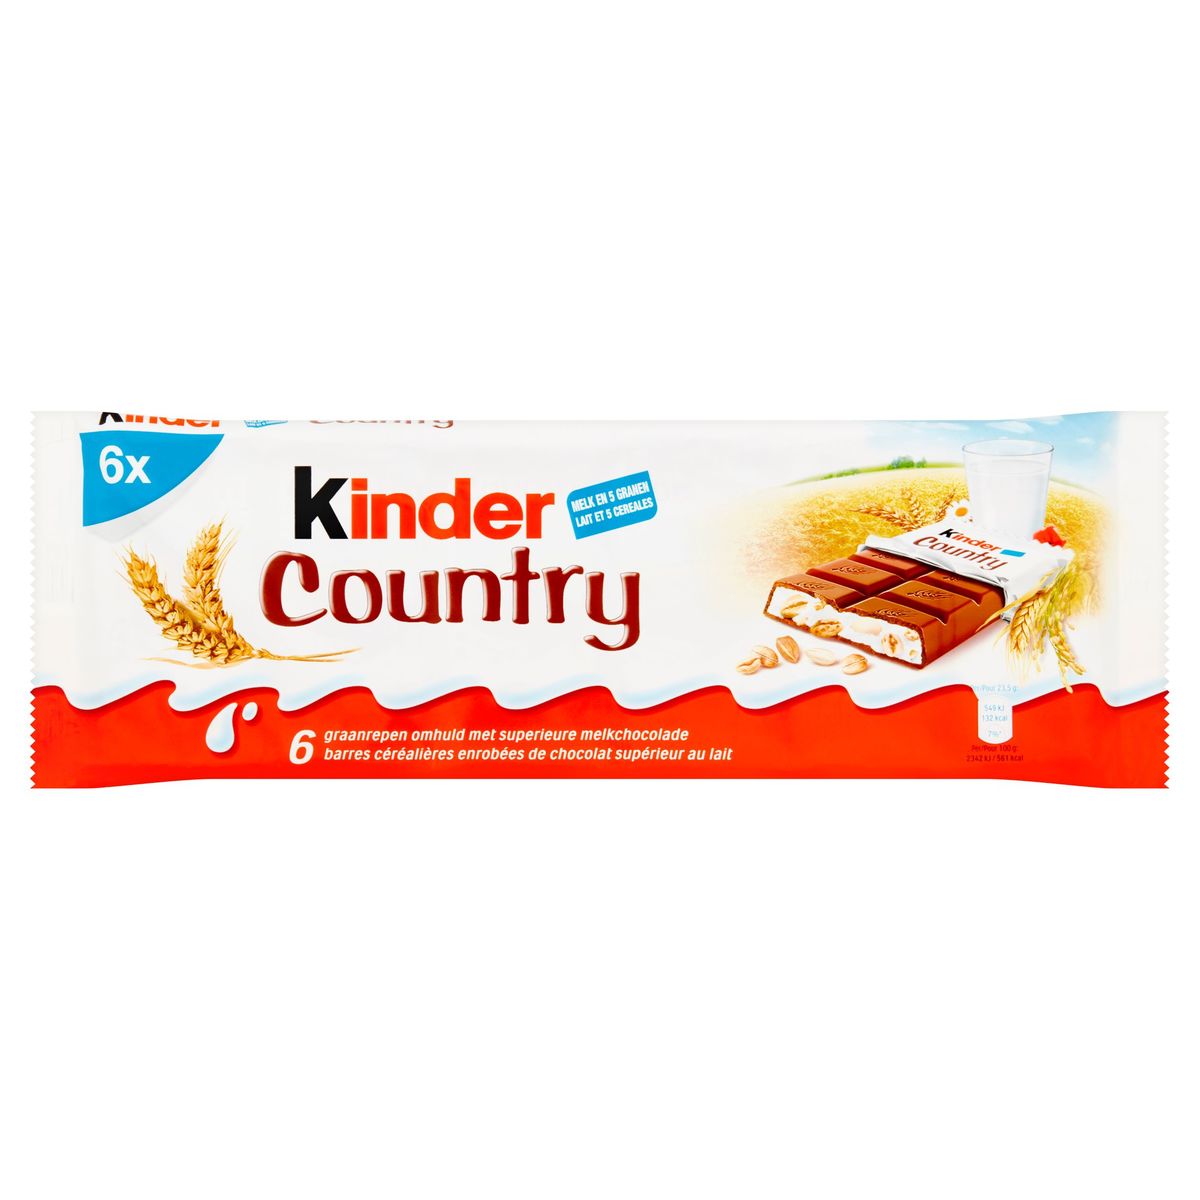 Kinder Country 6 x 23.5 g